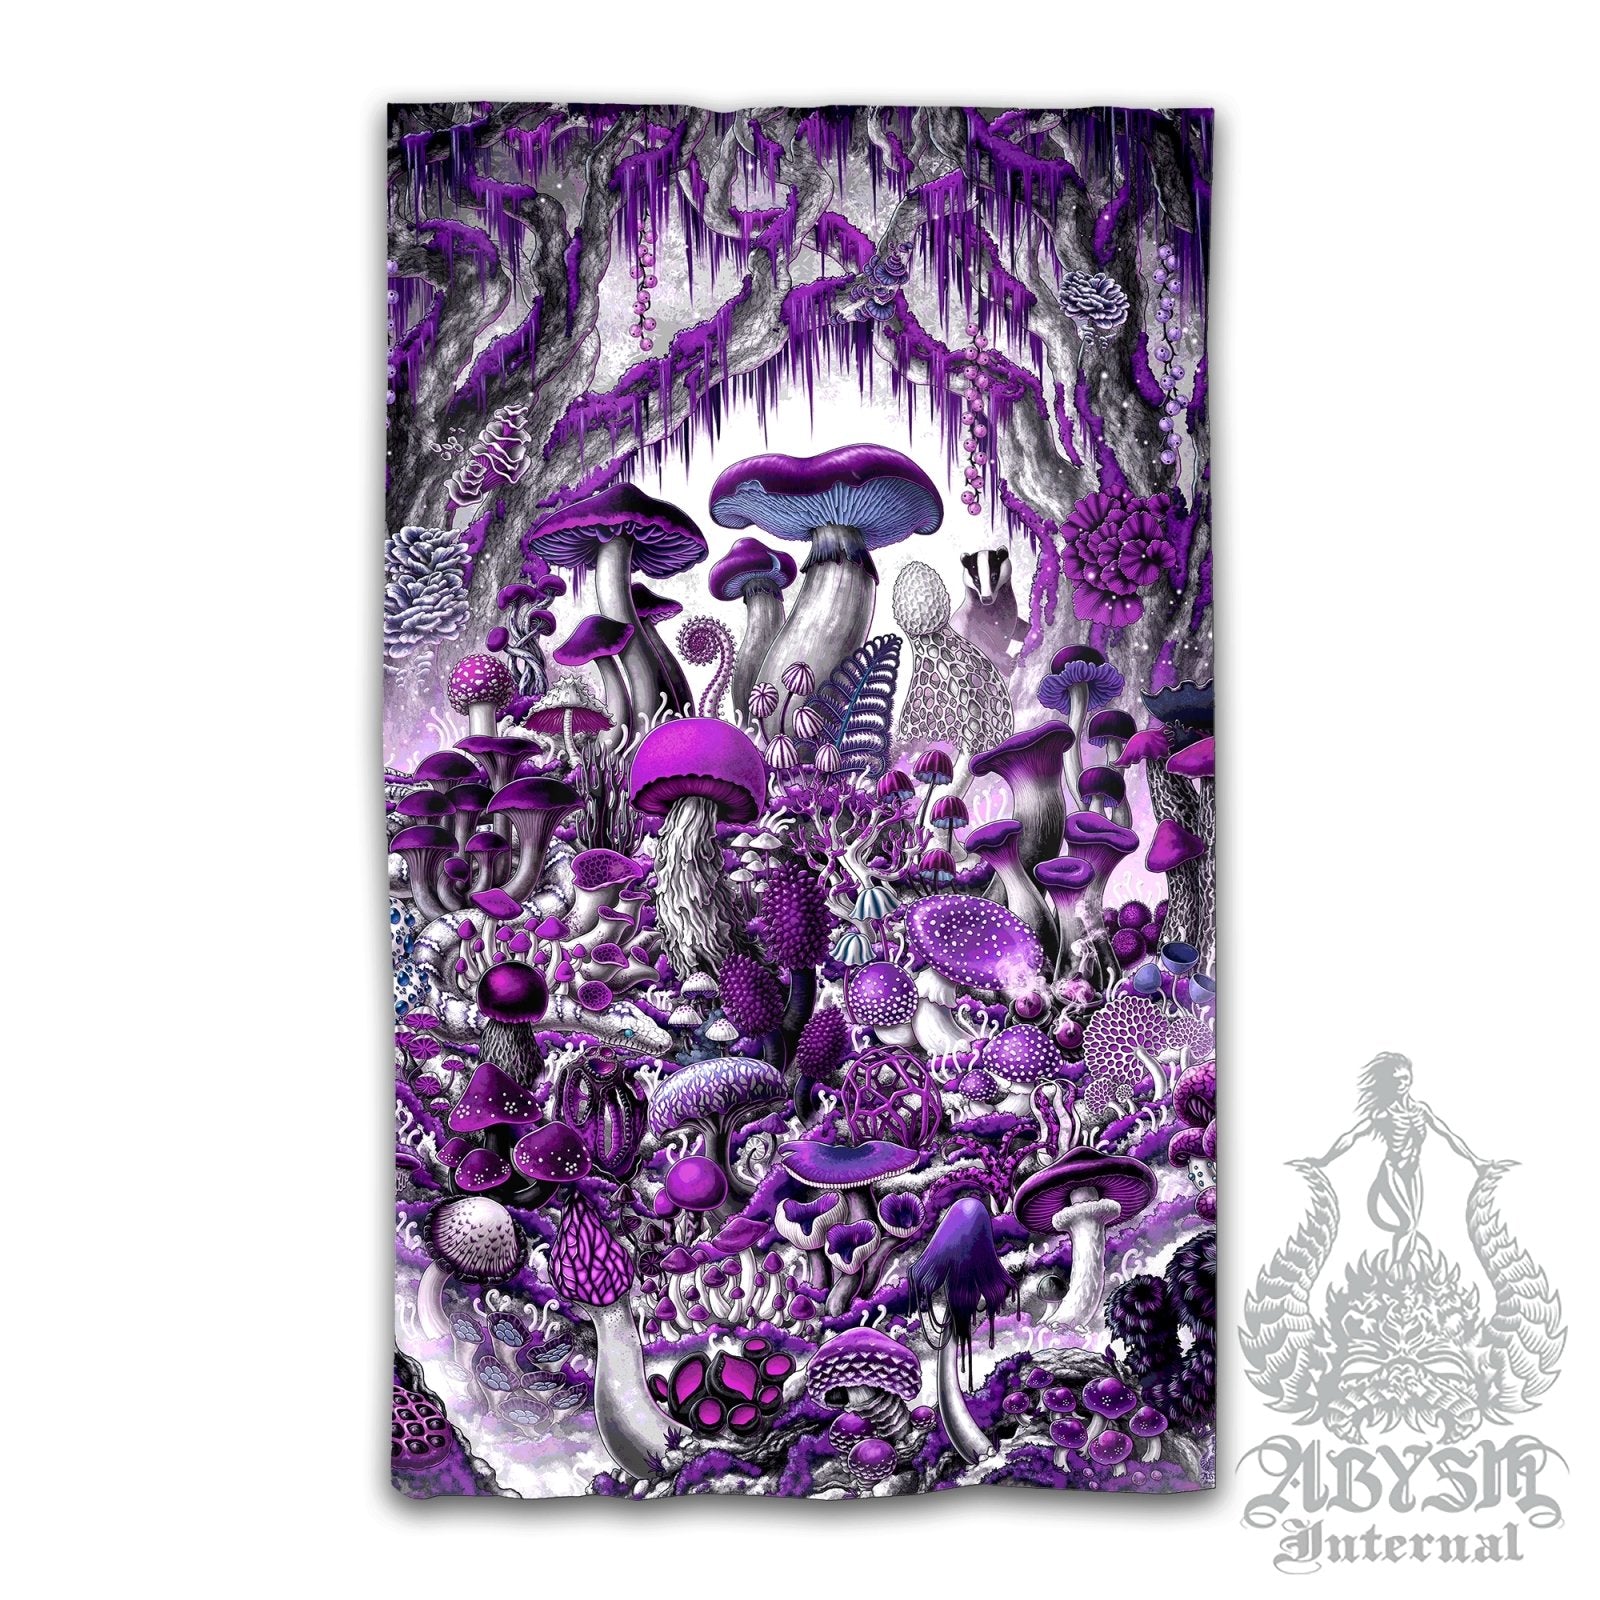 Gothic Mushrooms Blackout Curtains, Long Window Panels, Indie Art Print, Home and Room Decor - Magic Shrooms, Purple White Goth - Abysm Internal